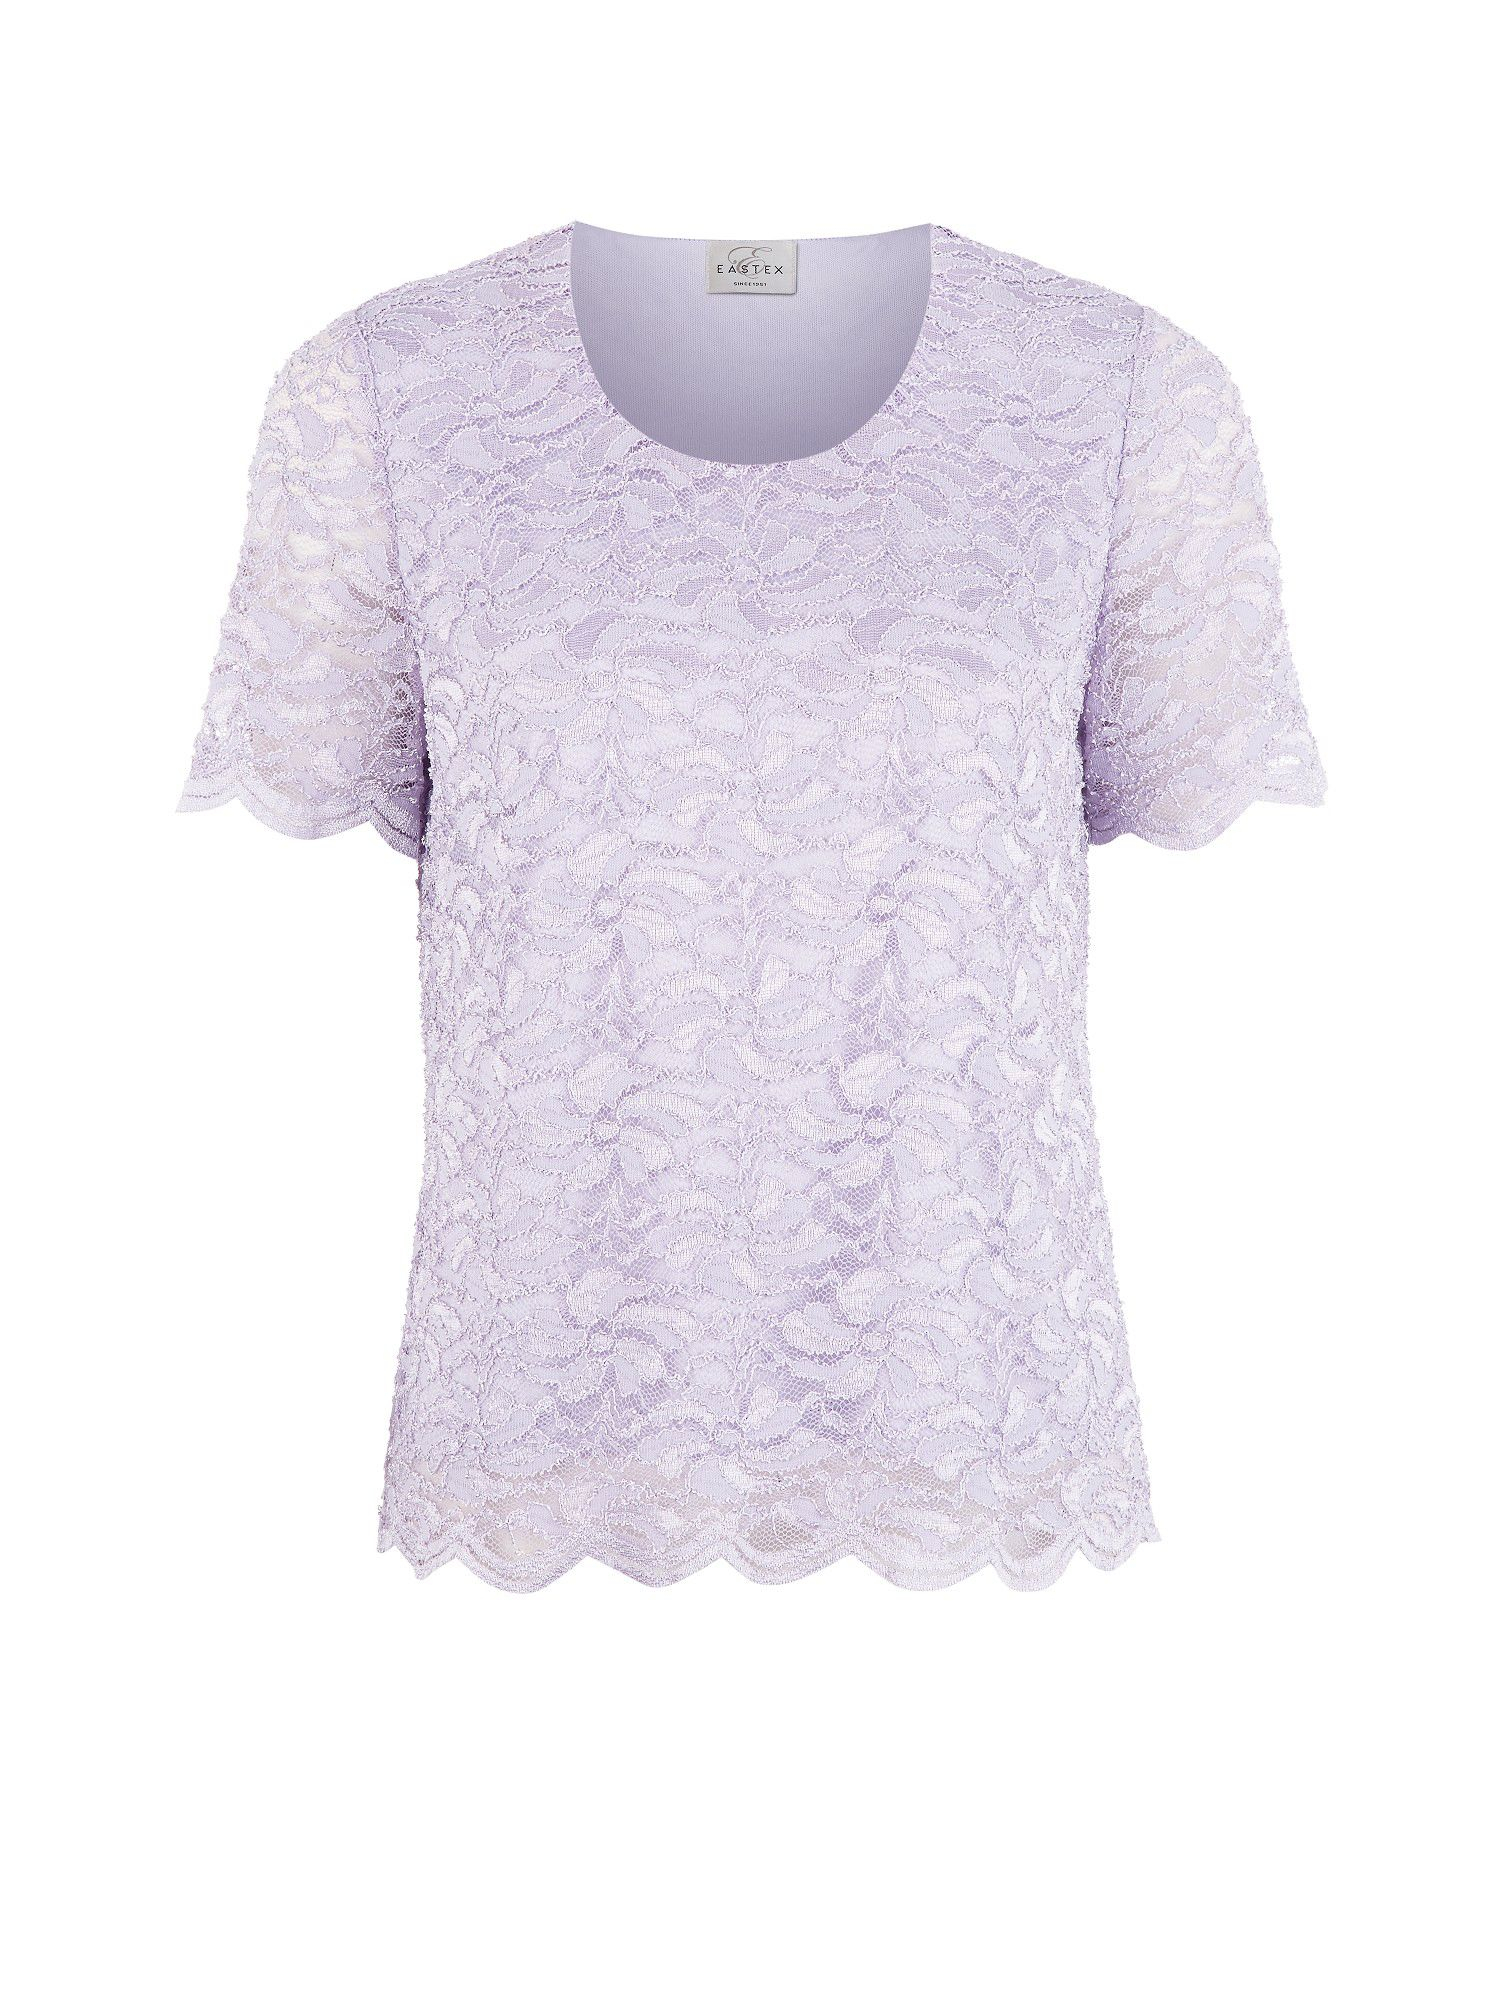 Eastex Lilac Lace Jersey Top in Purple | Lyst